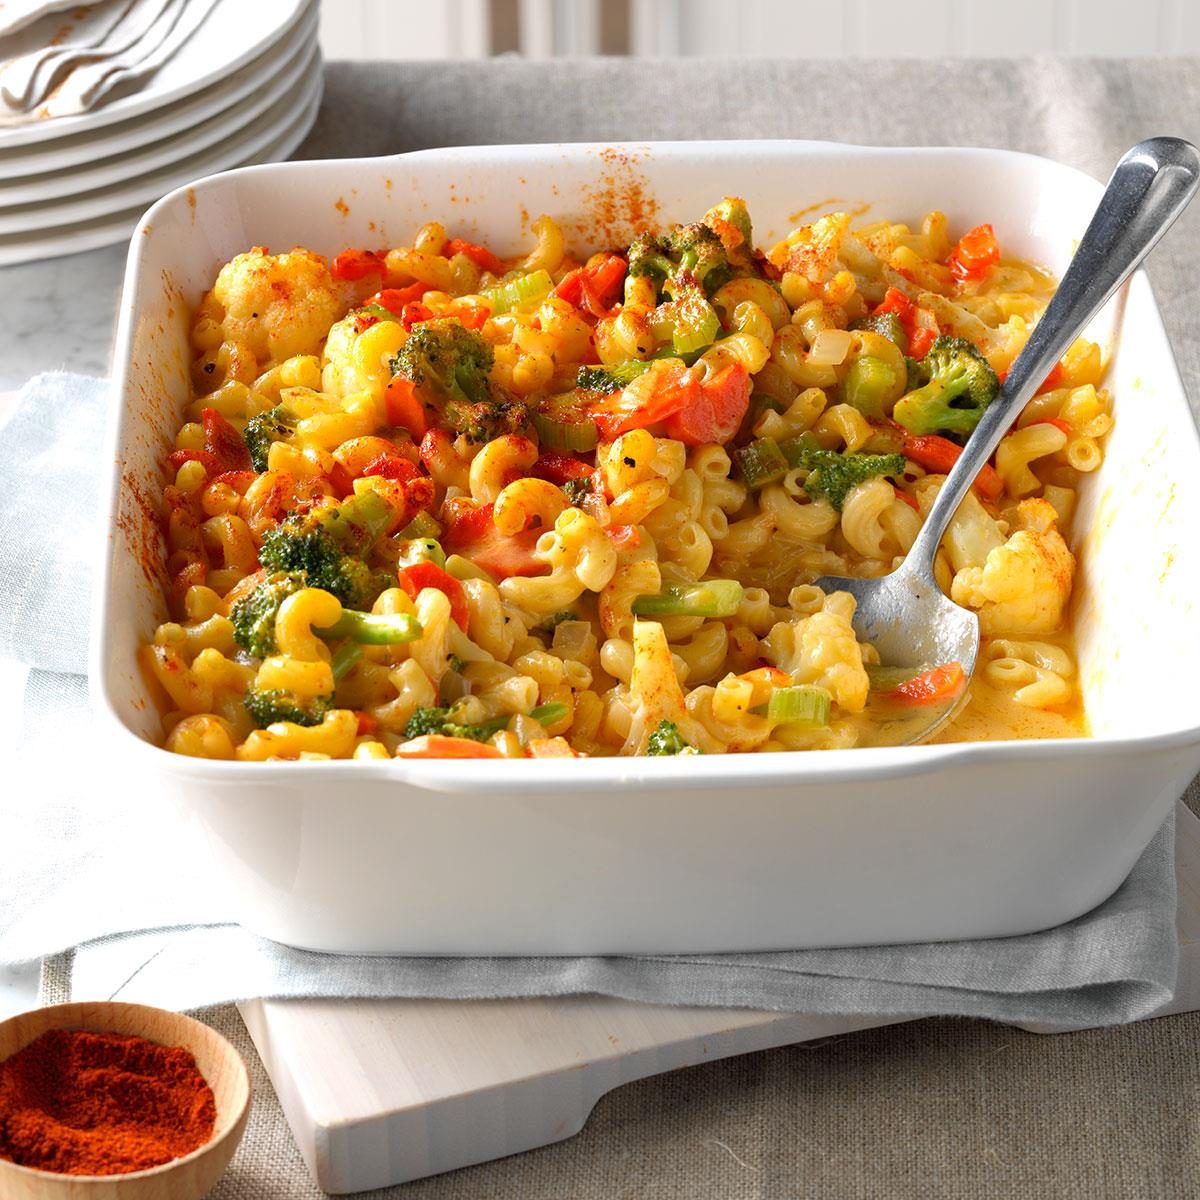 BAKED MACARONI AND CHEESEWITH VEGETABLES RECIPE